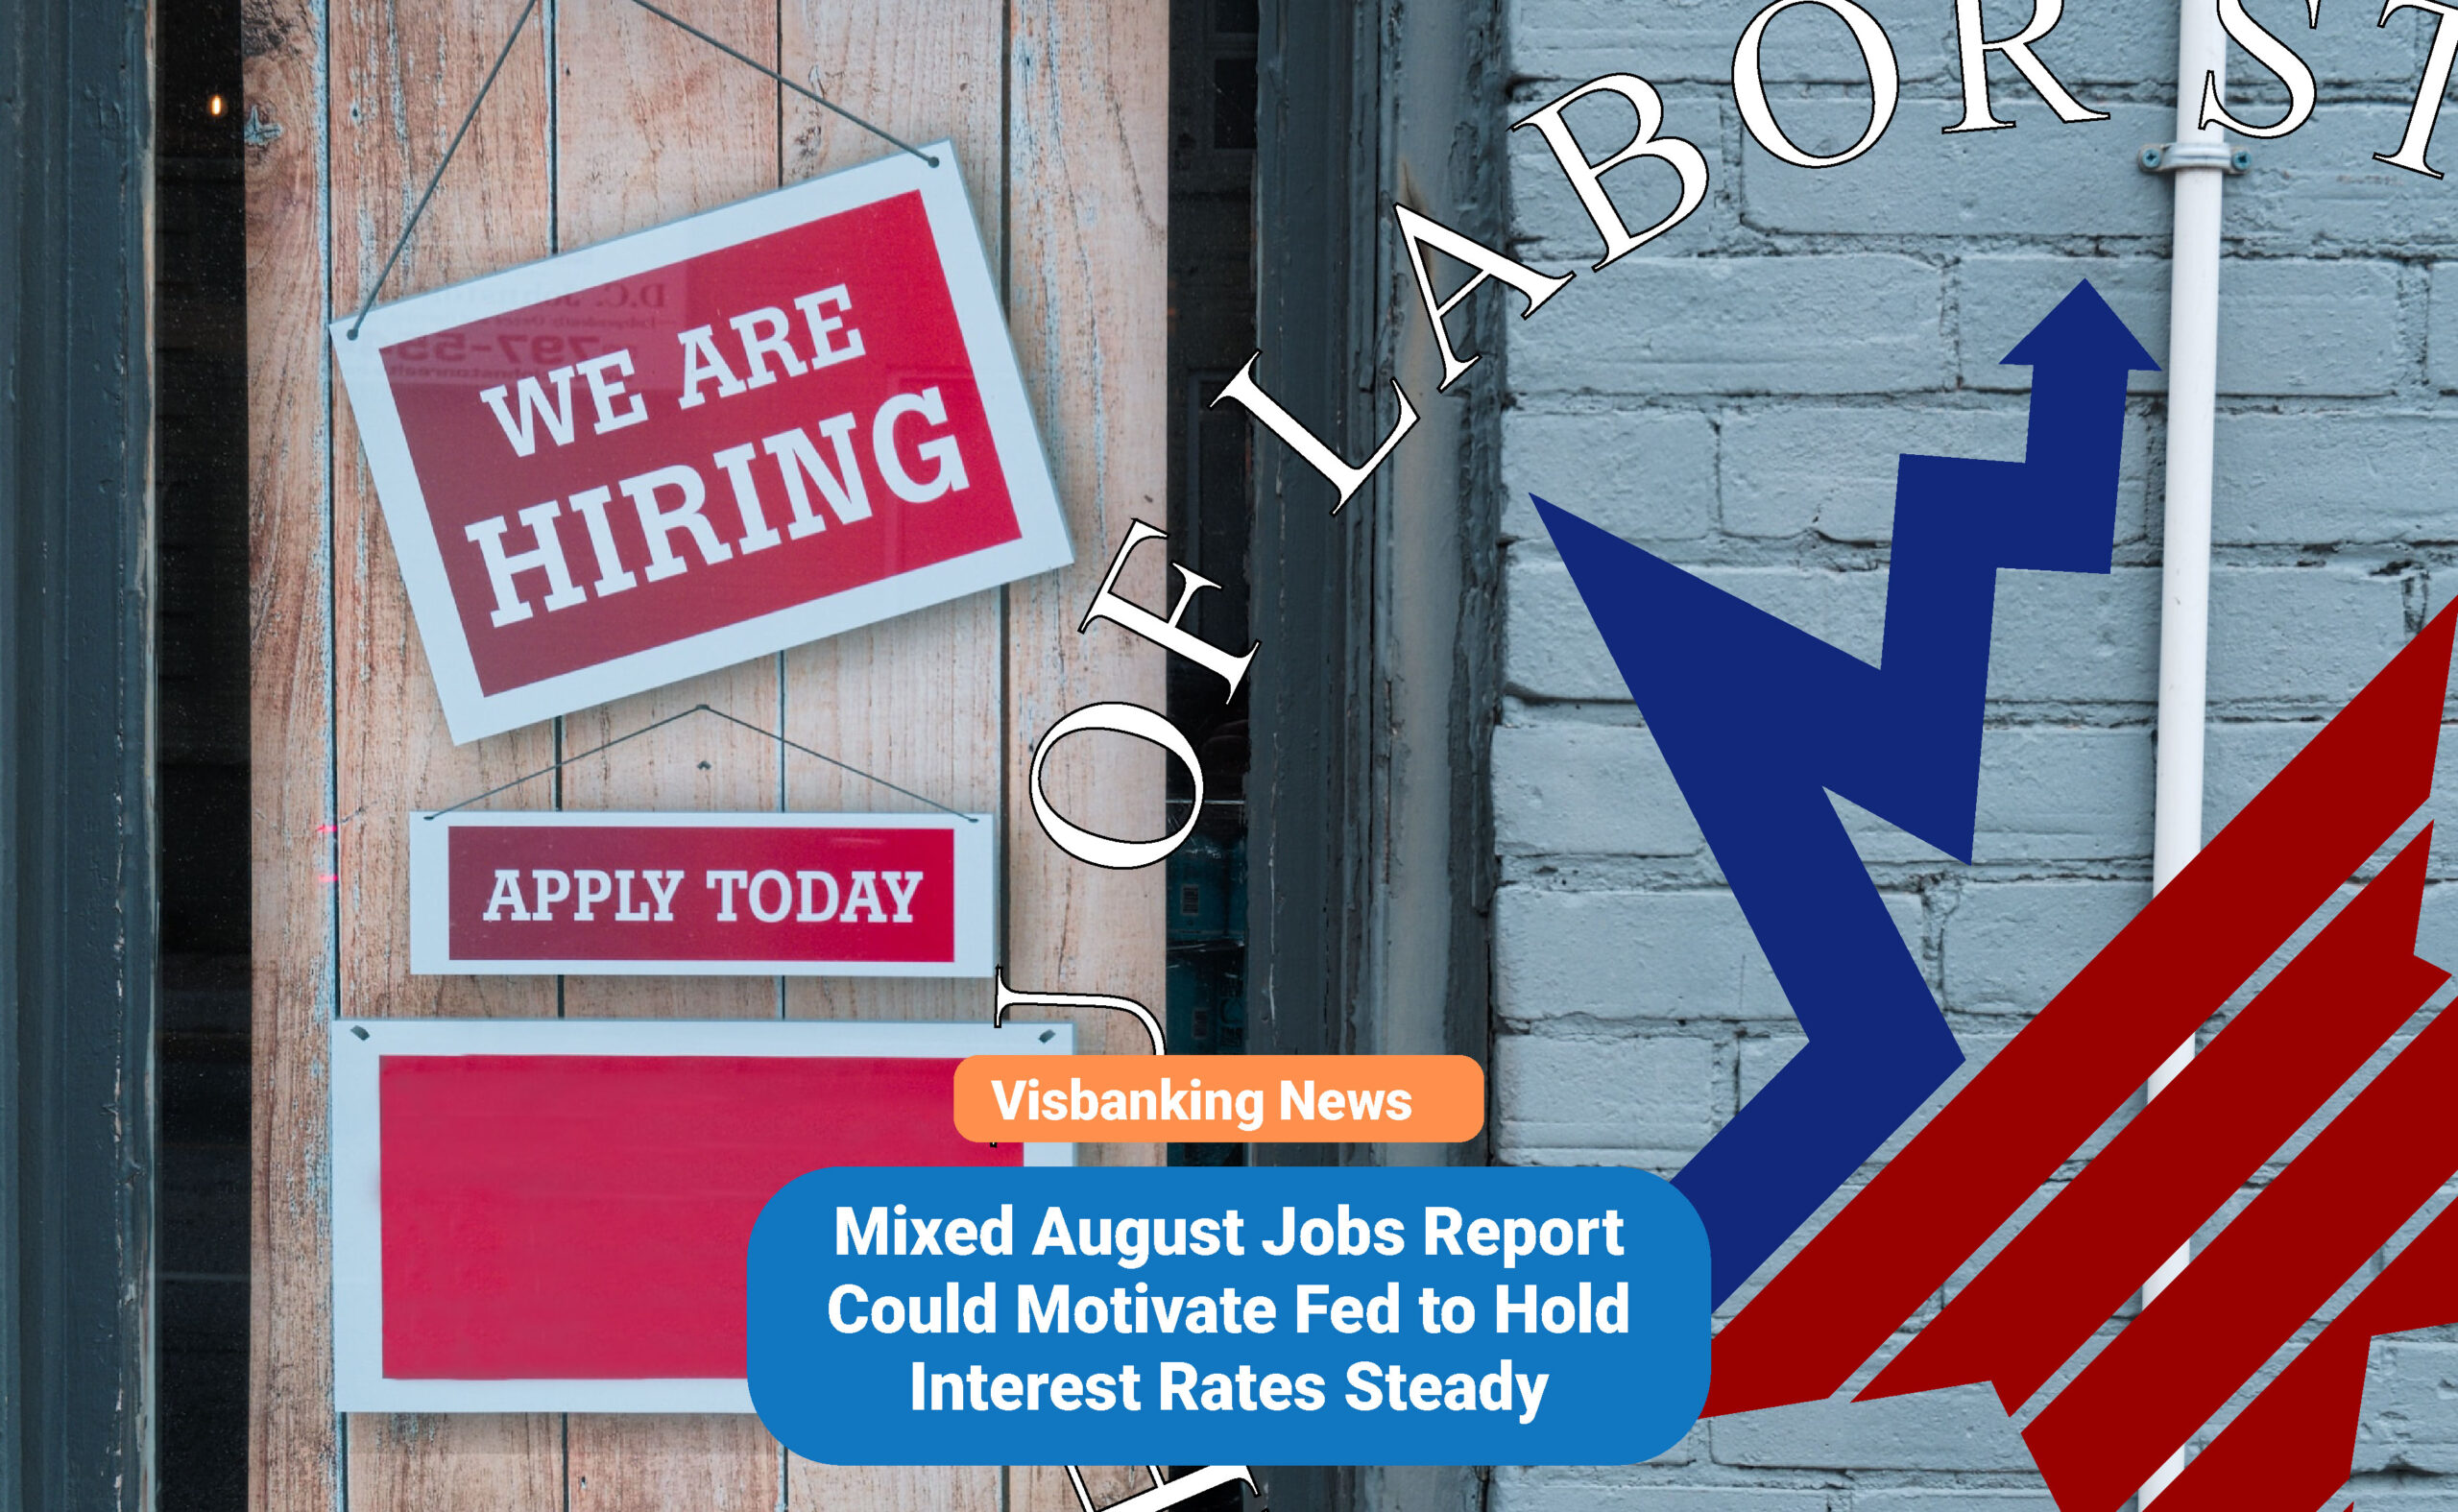 Mixed August Jobs Report Could Motivate Fed to Hold Interest Rates Steady